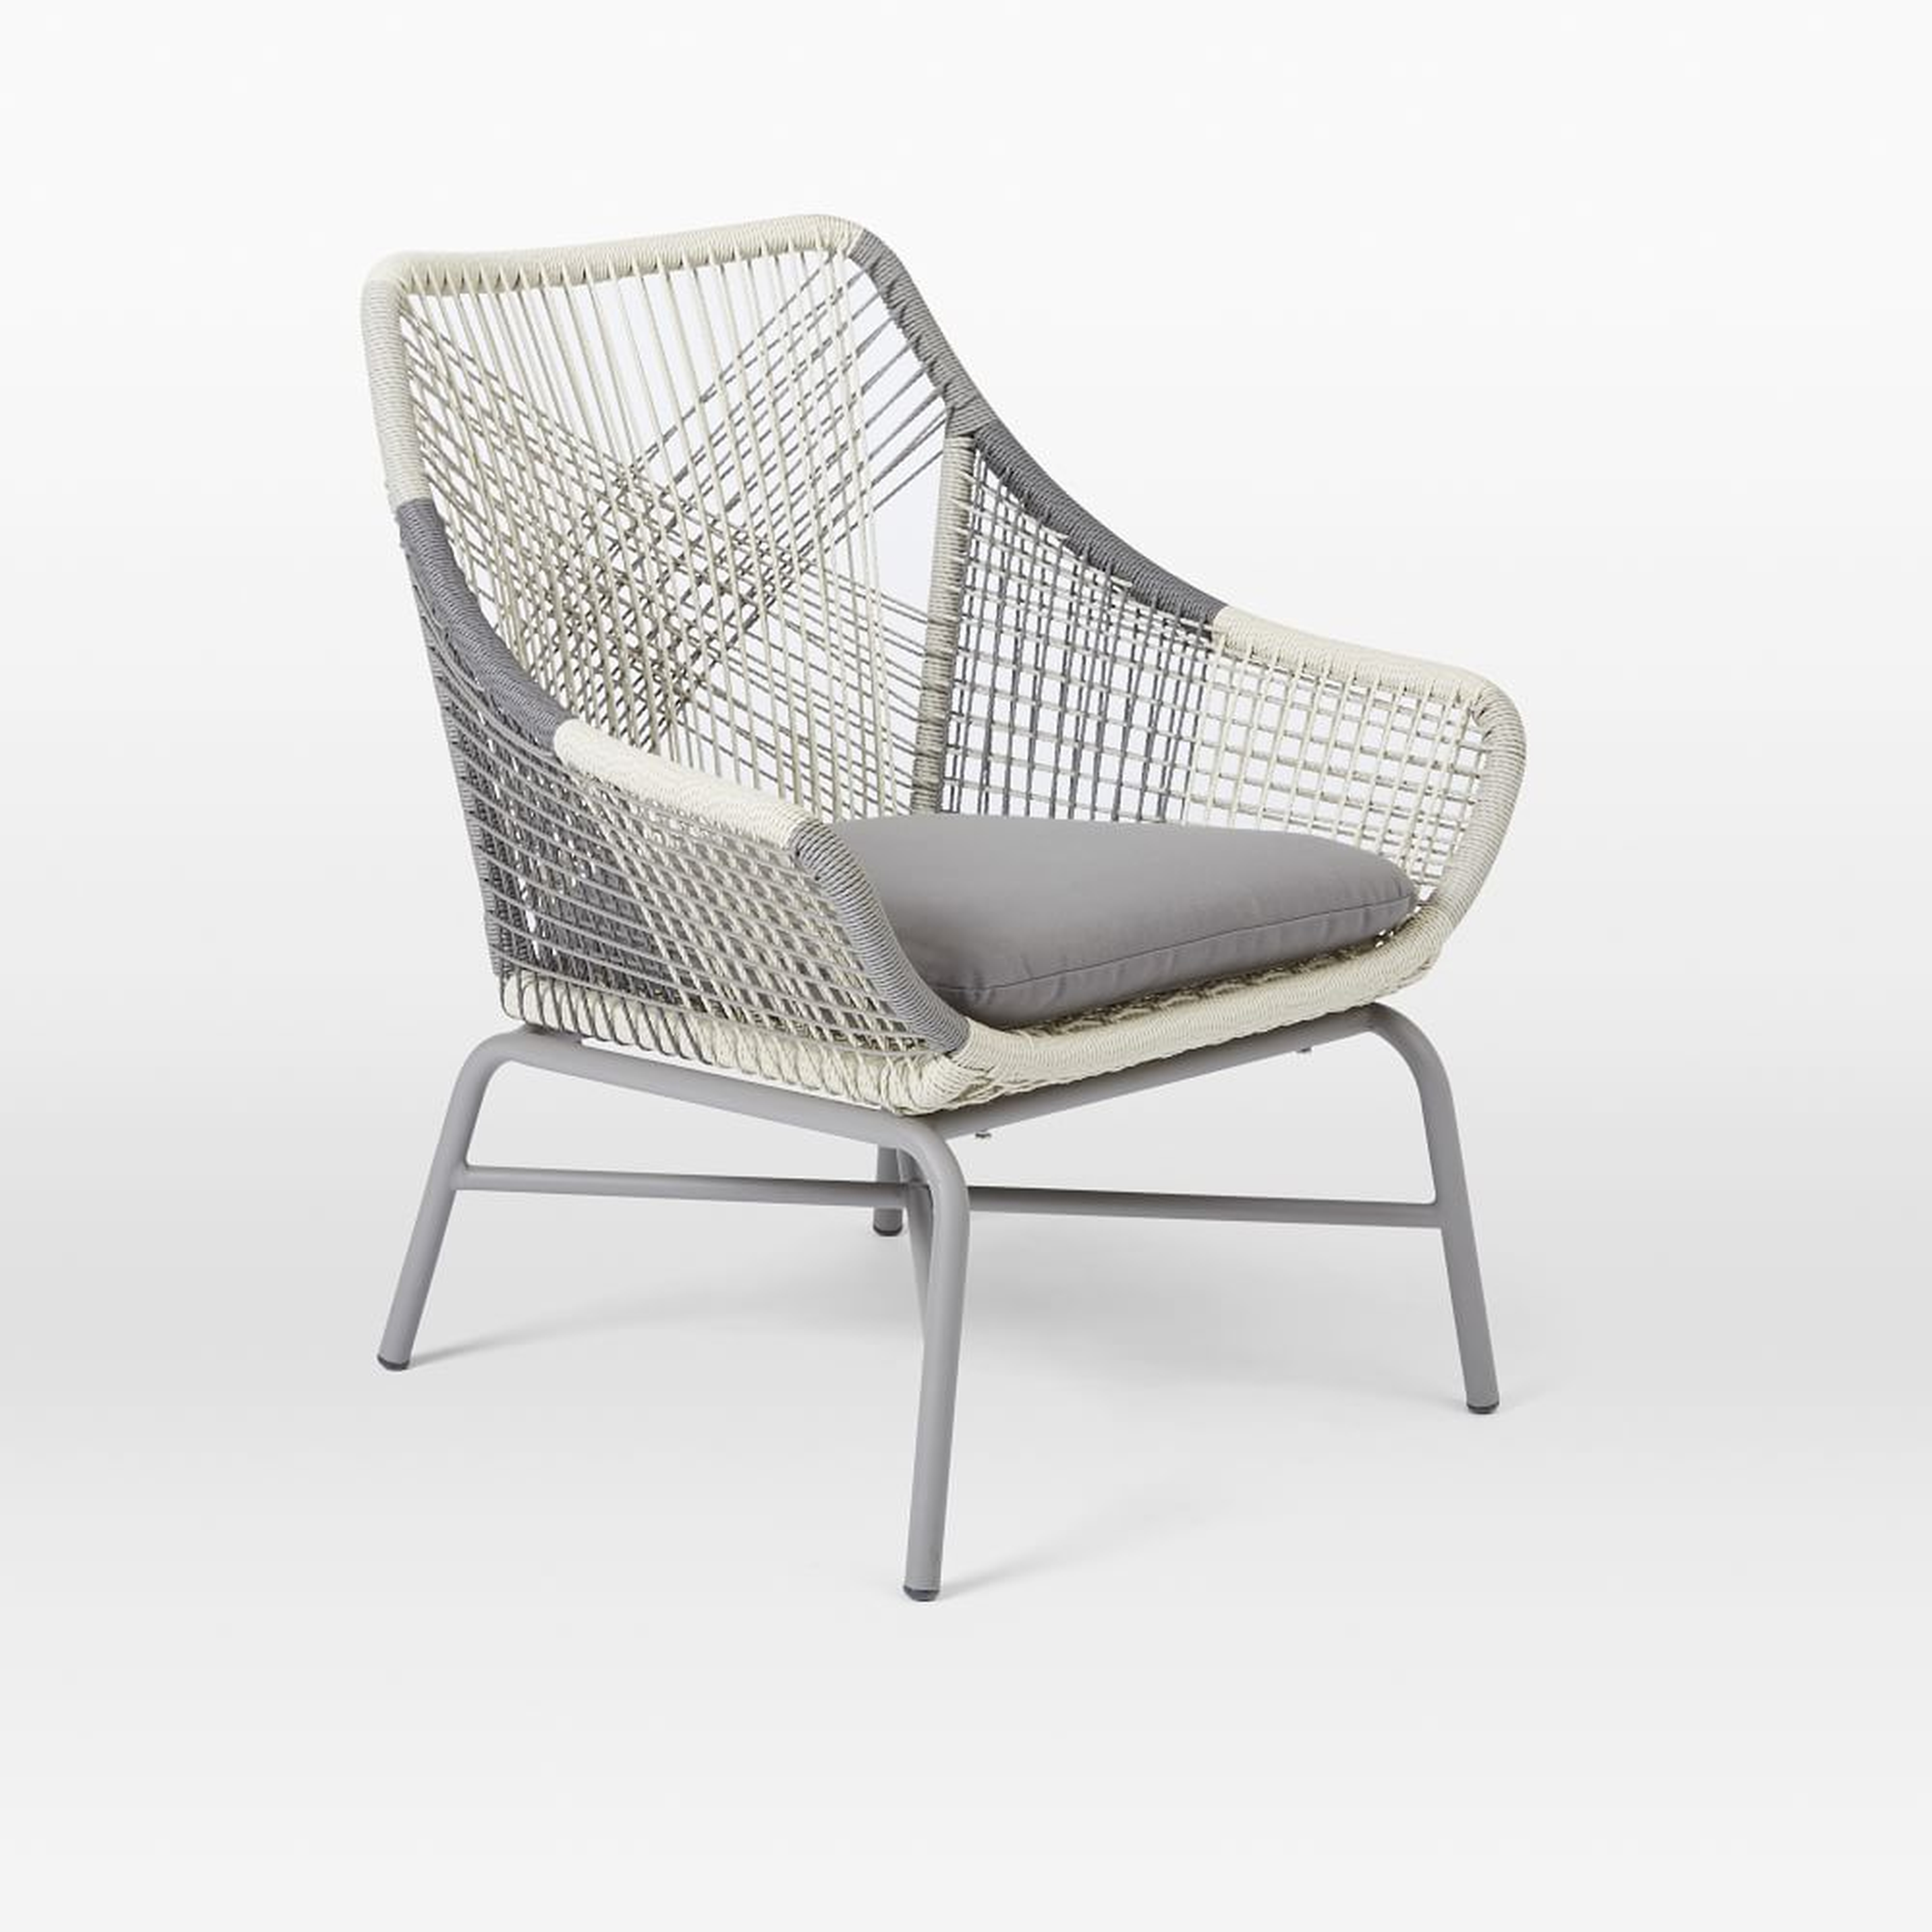 Huron Lounge Chair, Small - West Elm